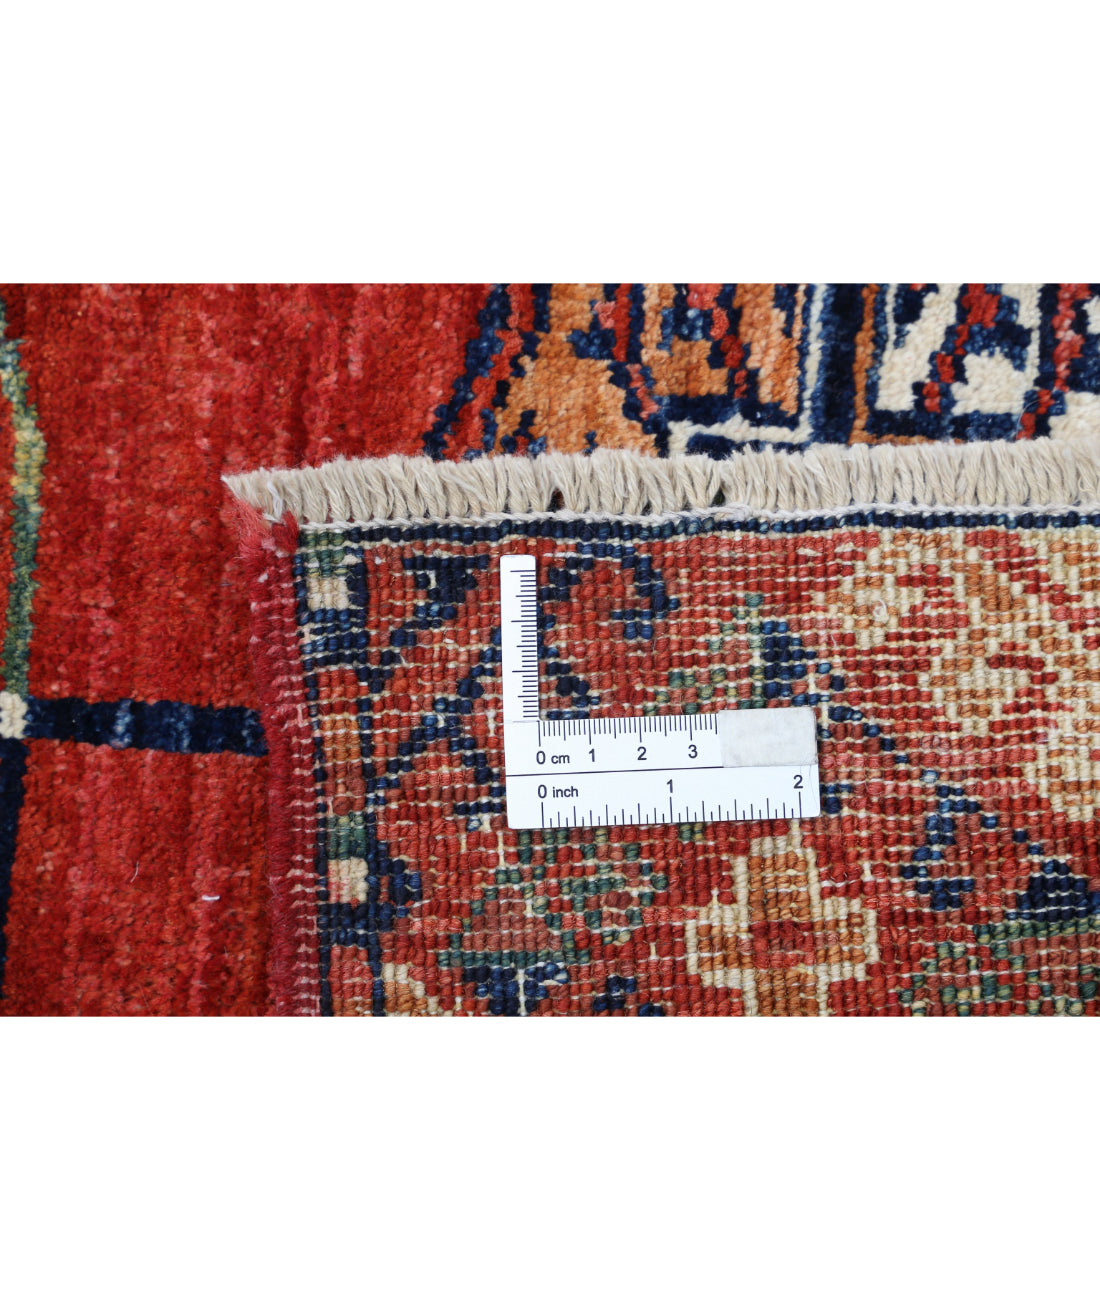 Hand Knotted Nomadic Caucasian Humna Wool Rug - 6'7'' x 9'7'' 6'7'' x 9'7'' (198 X 288) / Red / N/A